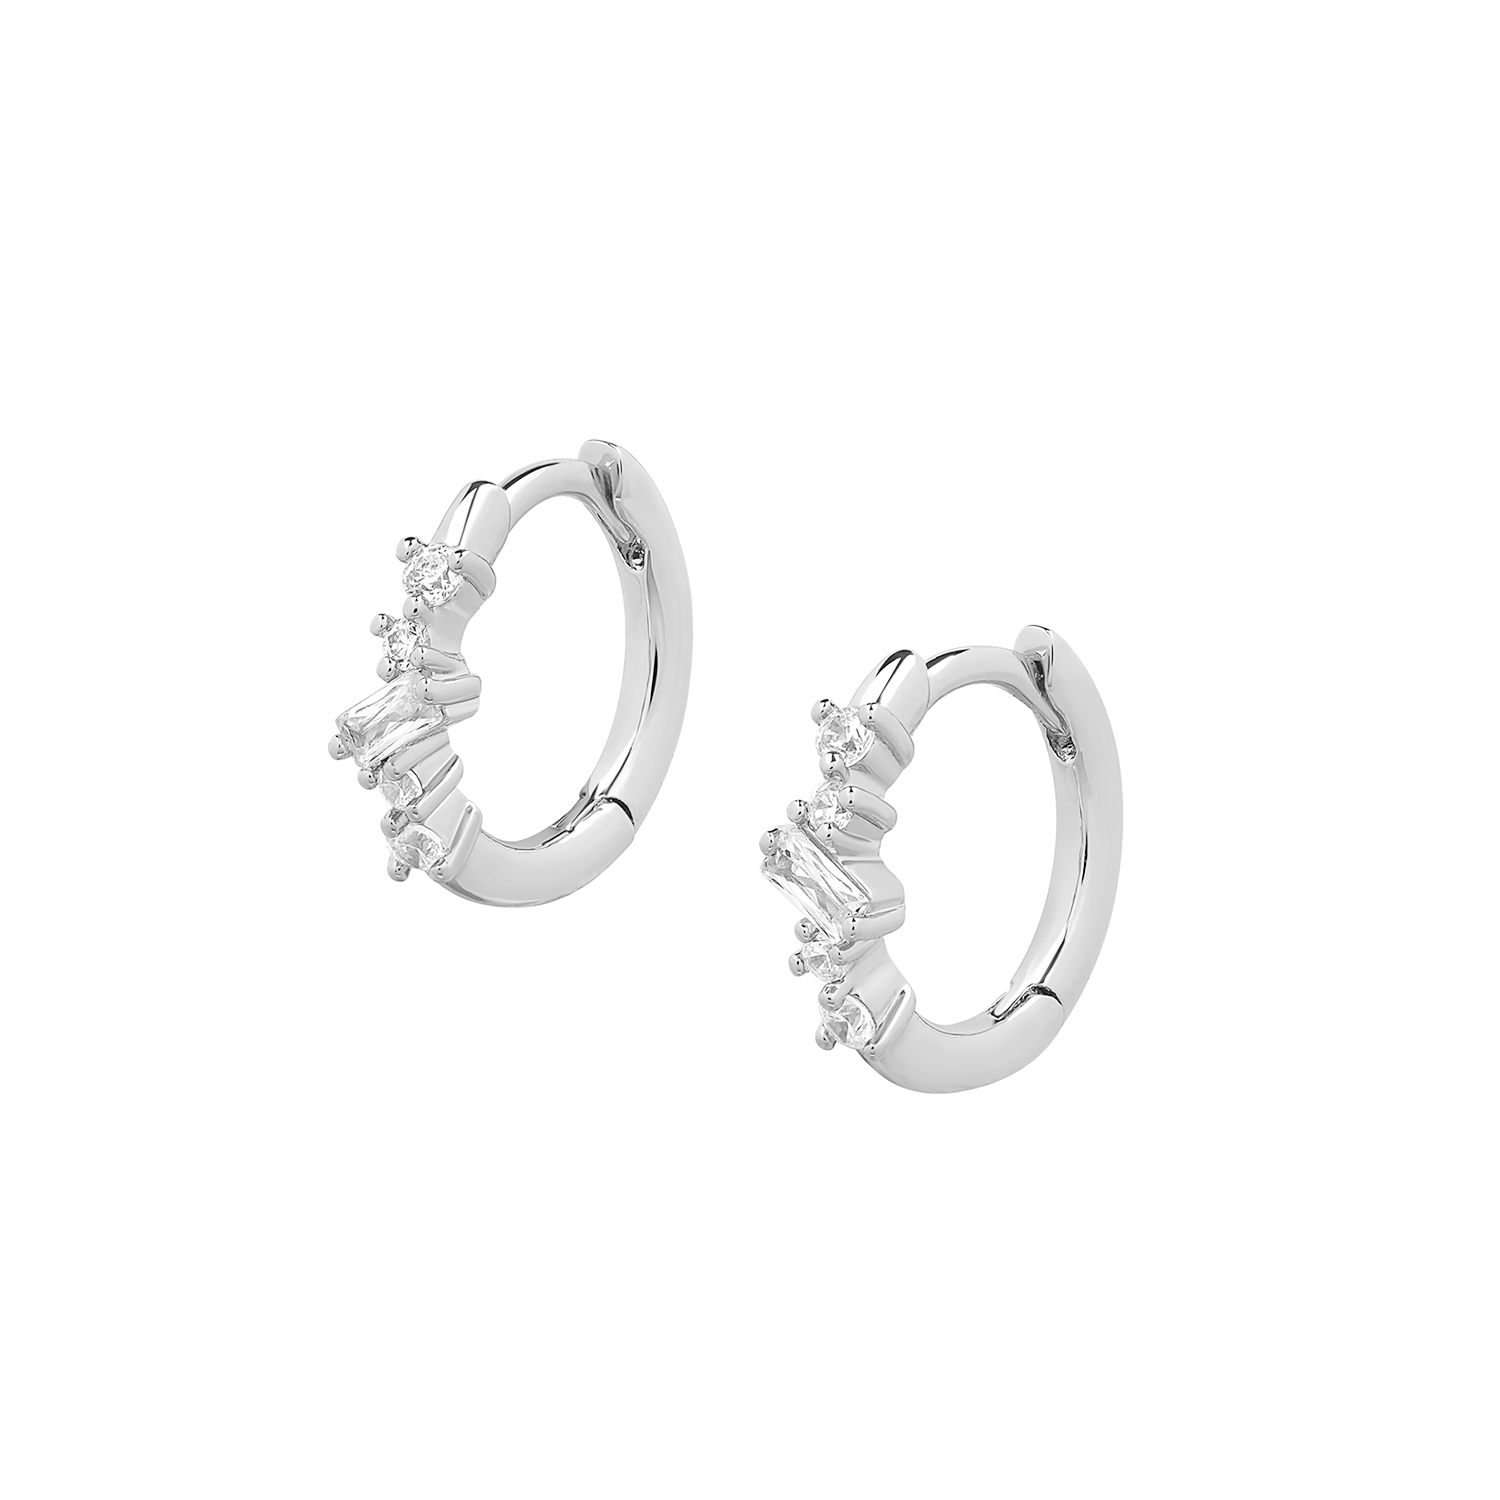 Elegant and statement earrings. 925 silver huggies set with cubic zirconia stones.